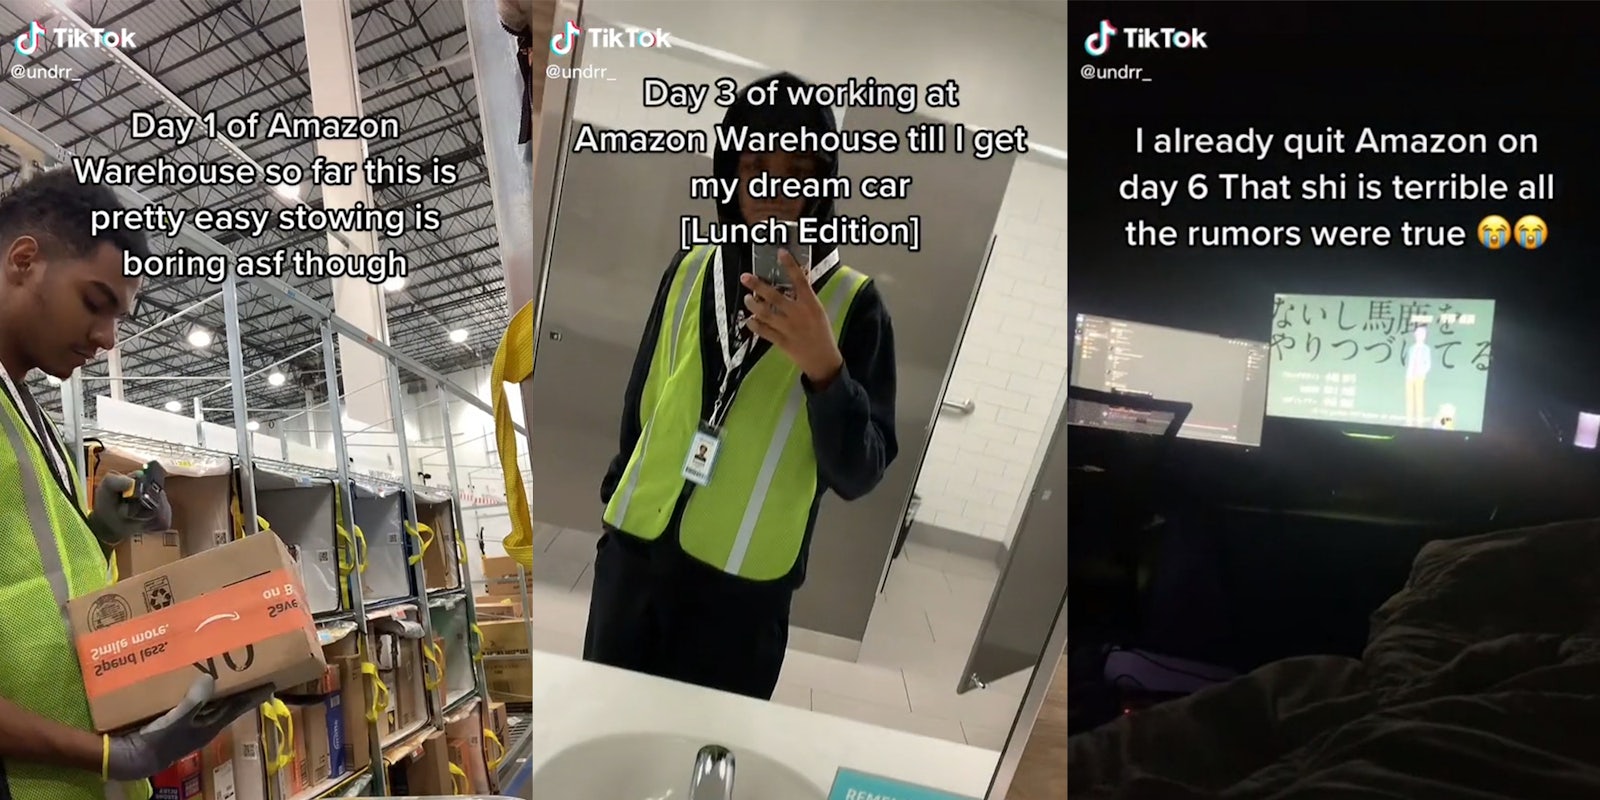 Man in Amazon warehouse with caption 'Day 1 of Amazon Warehouse so far this is pretty easy stowing is boring asf though' (l) Amazon employee in bathroom with caption 'Day 3 of working at Amazon Warehouse till I get my dream car [Lunch Edition]' (c) monitor in dark bedroom with caption 'I already quit Amazon on day 6 That shi is terrible all the rumors were true' (r)